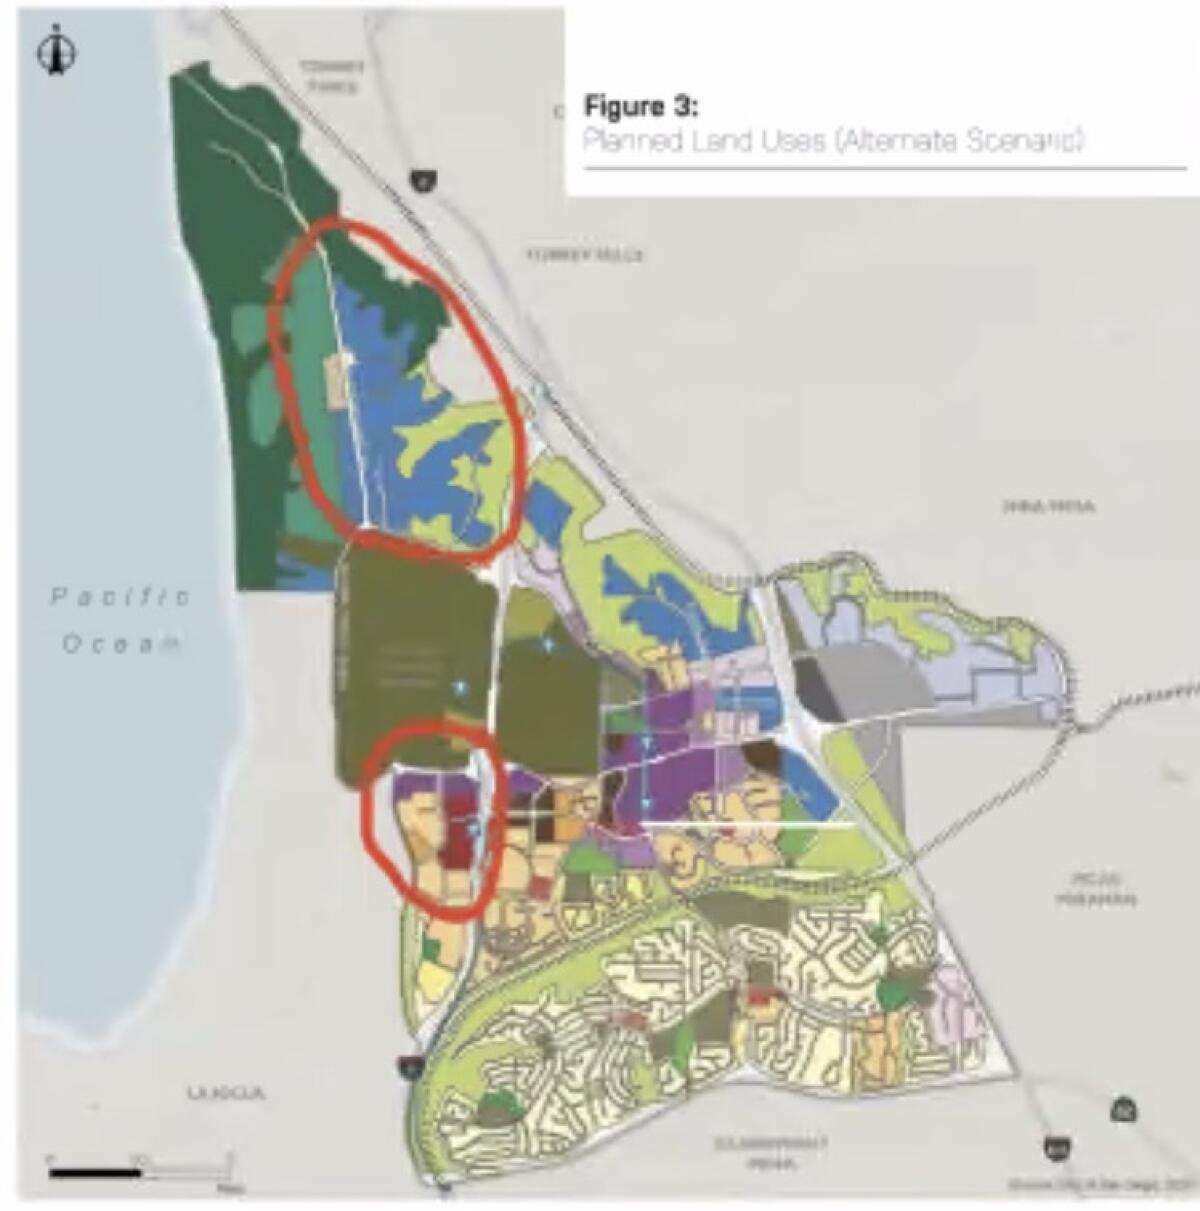 The portions of the University Community Plan circled in red are considered of most concern to La Jolla.